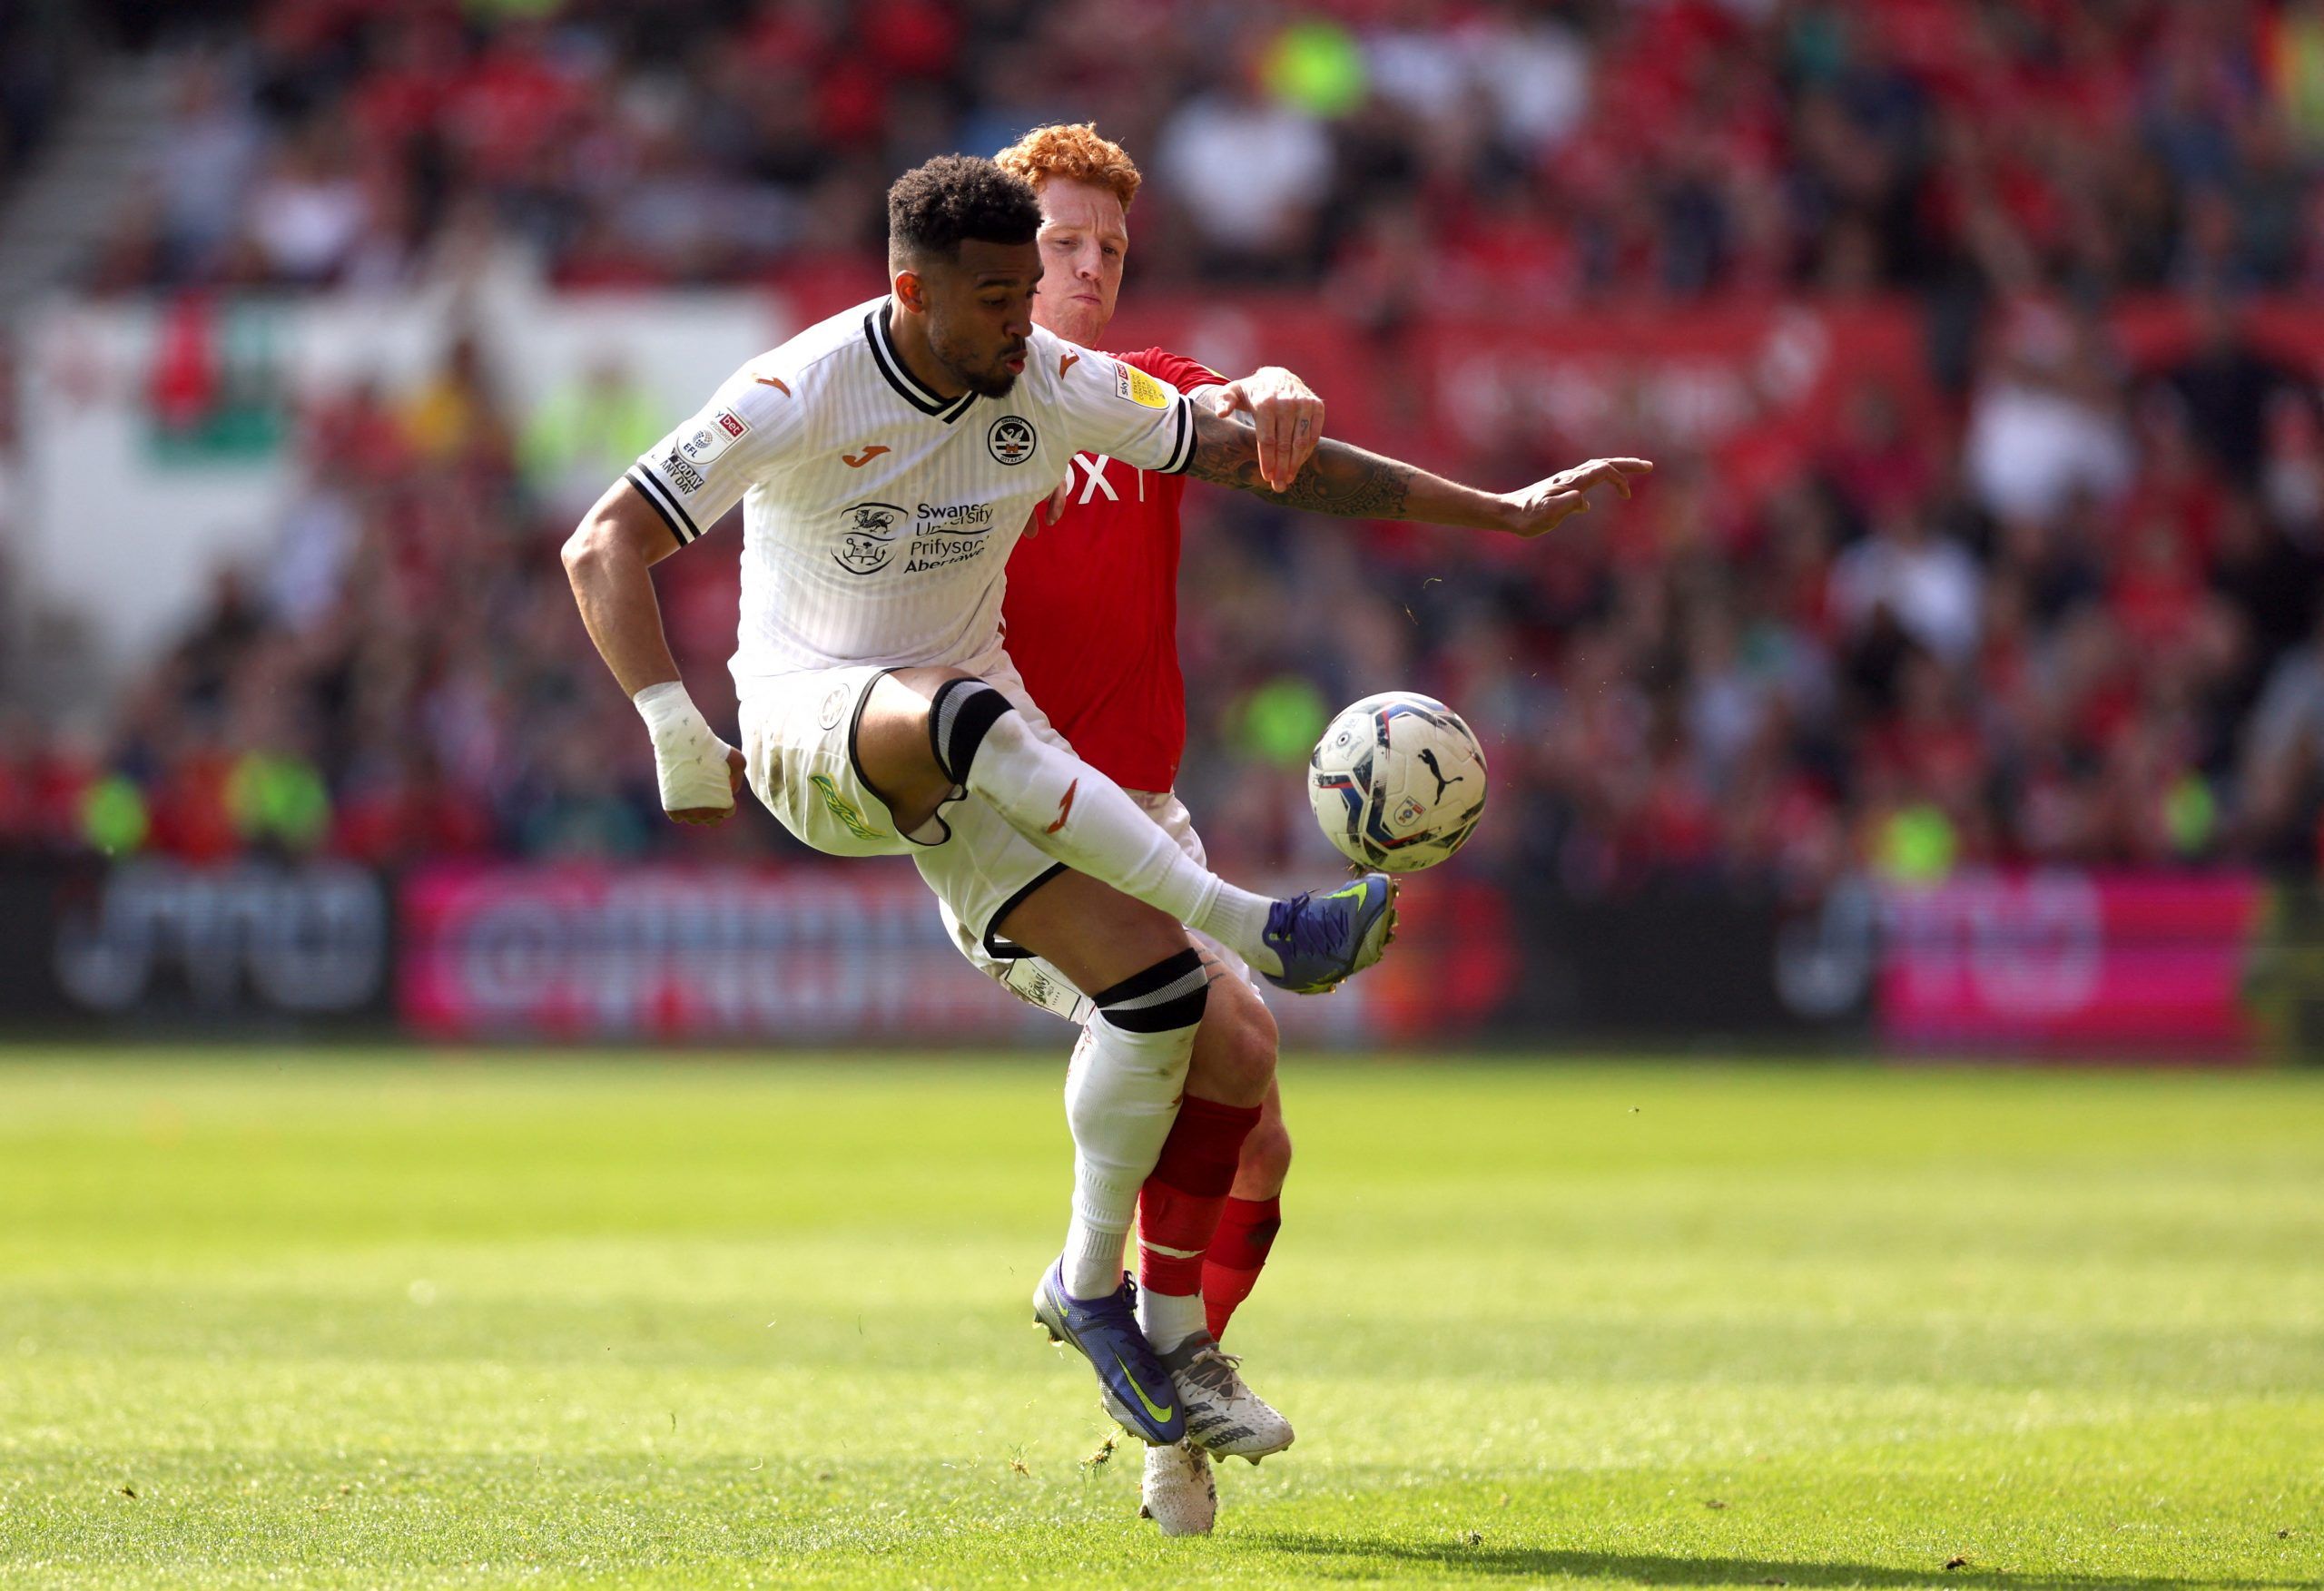 Championship, Nottingham Forest, Swansea City, Fulham, Cyrus Christie, NFFC, NFFC transfer news, NFFC transfer update, Transfer Focus, Forest news, Forest transfer update, Forest transfer rumours